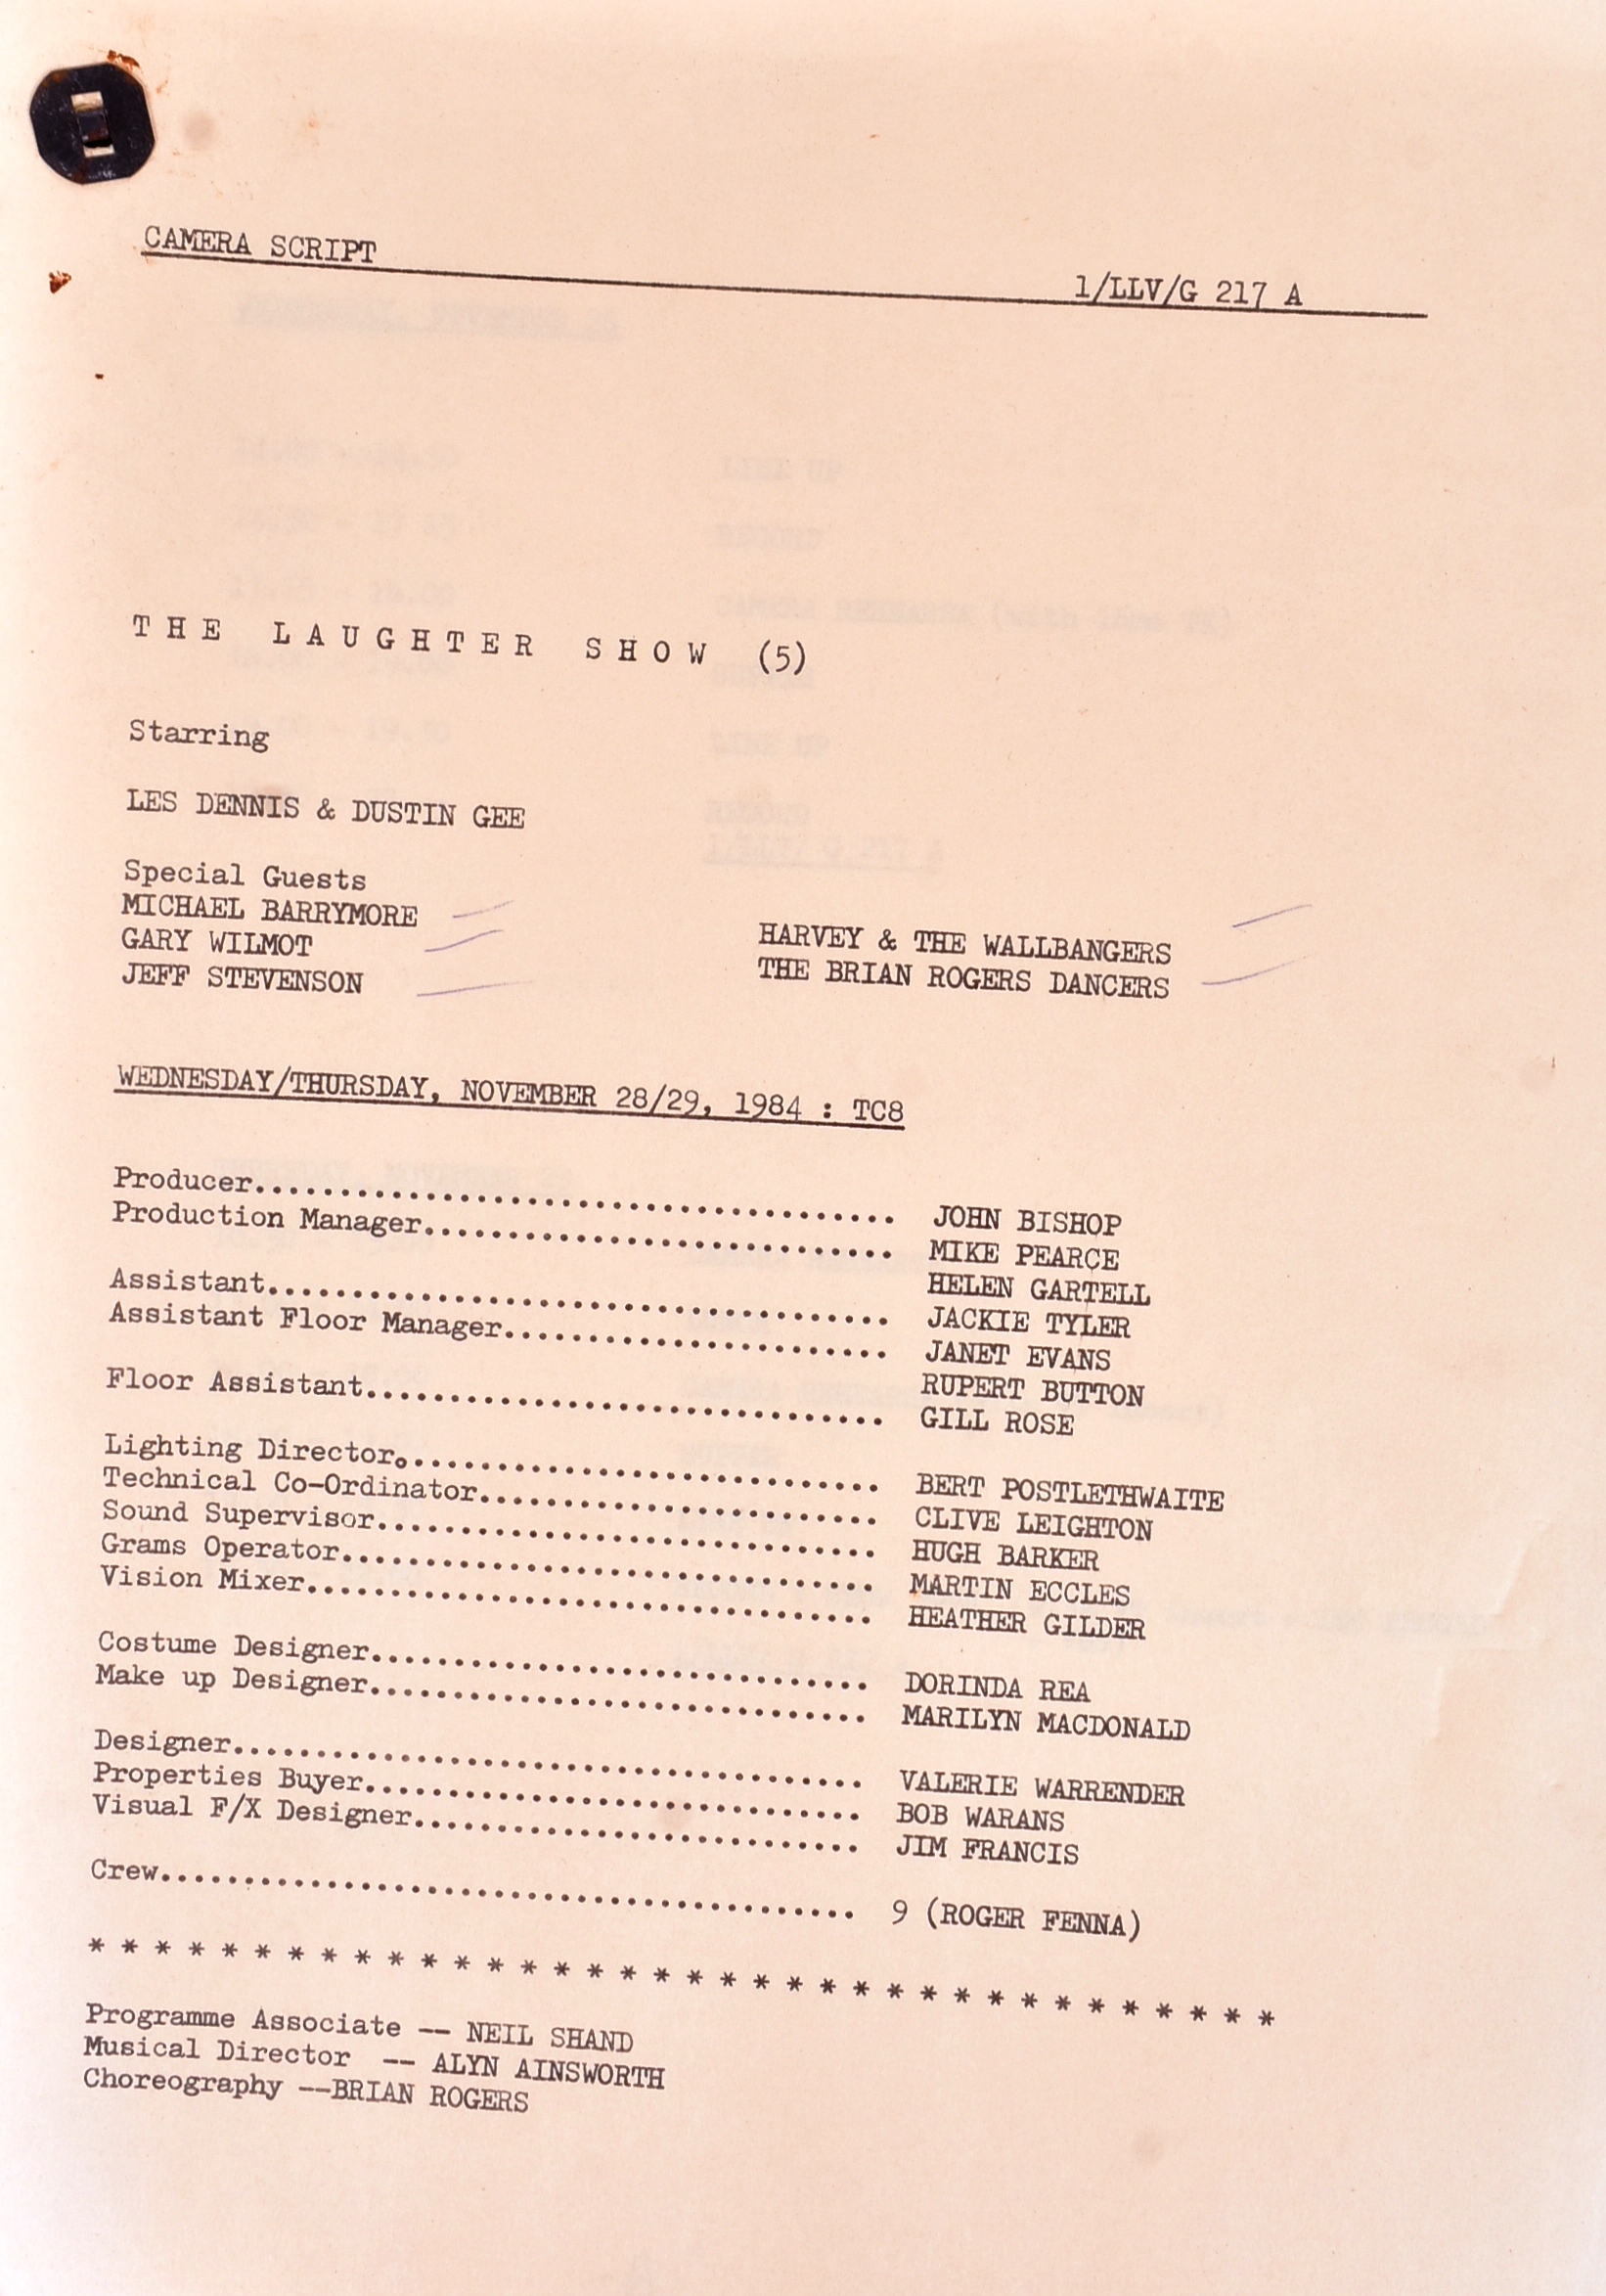 THE LAUGHTER SHOW (LES DENNIS & DUSTIN GEE) - ORIGINAL SCRIPTS - Image 2 of 6